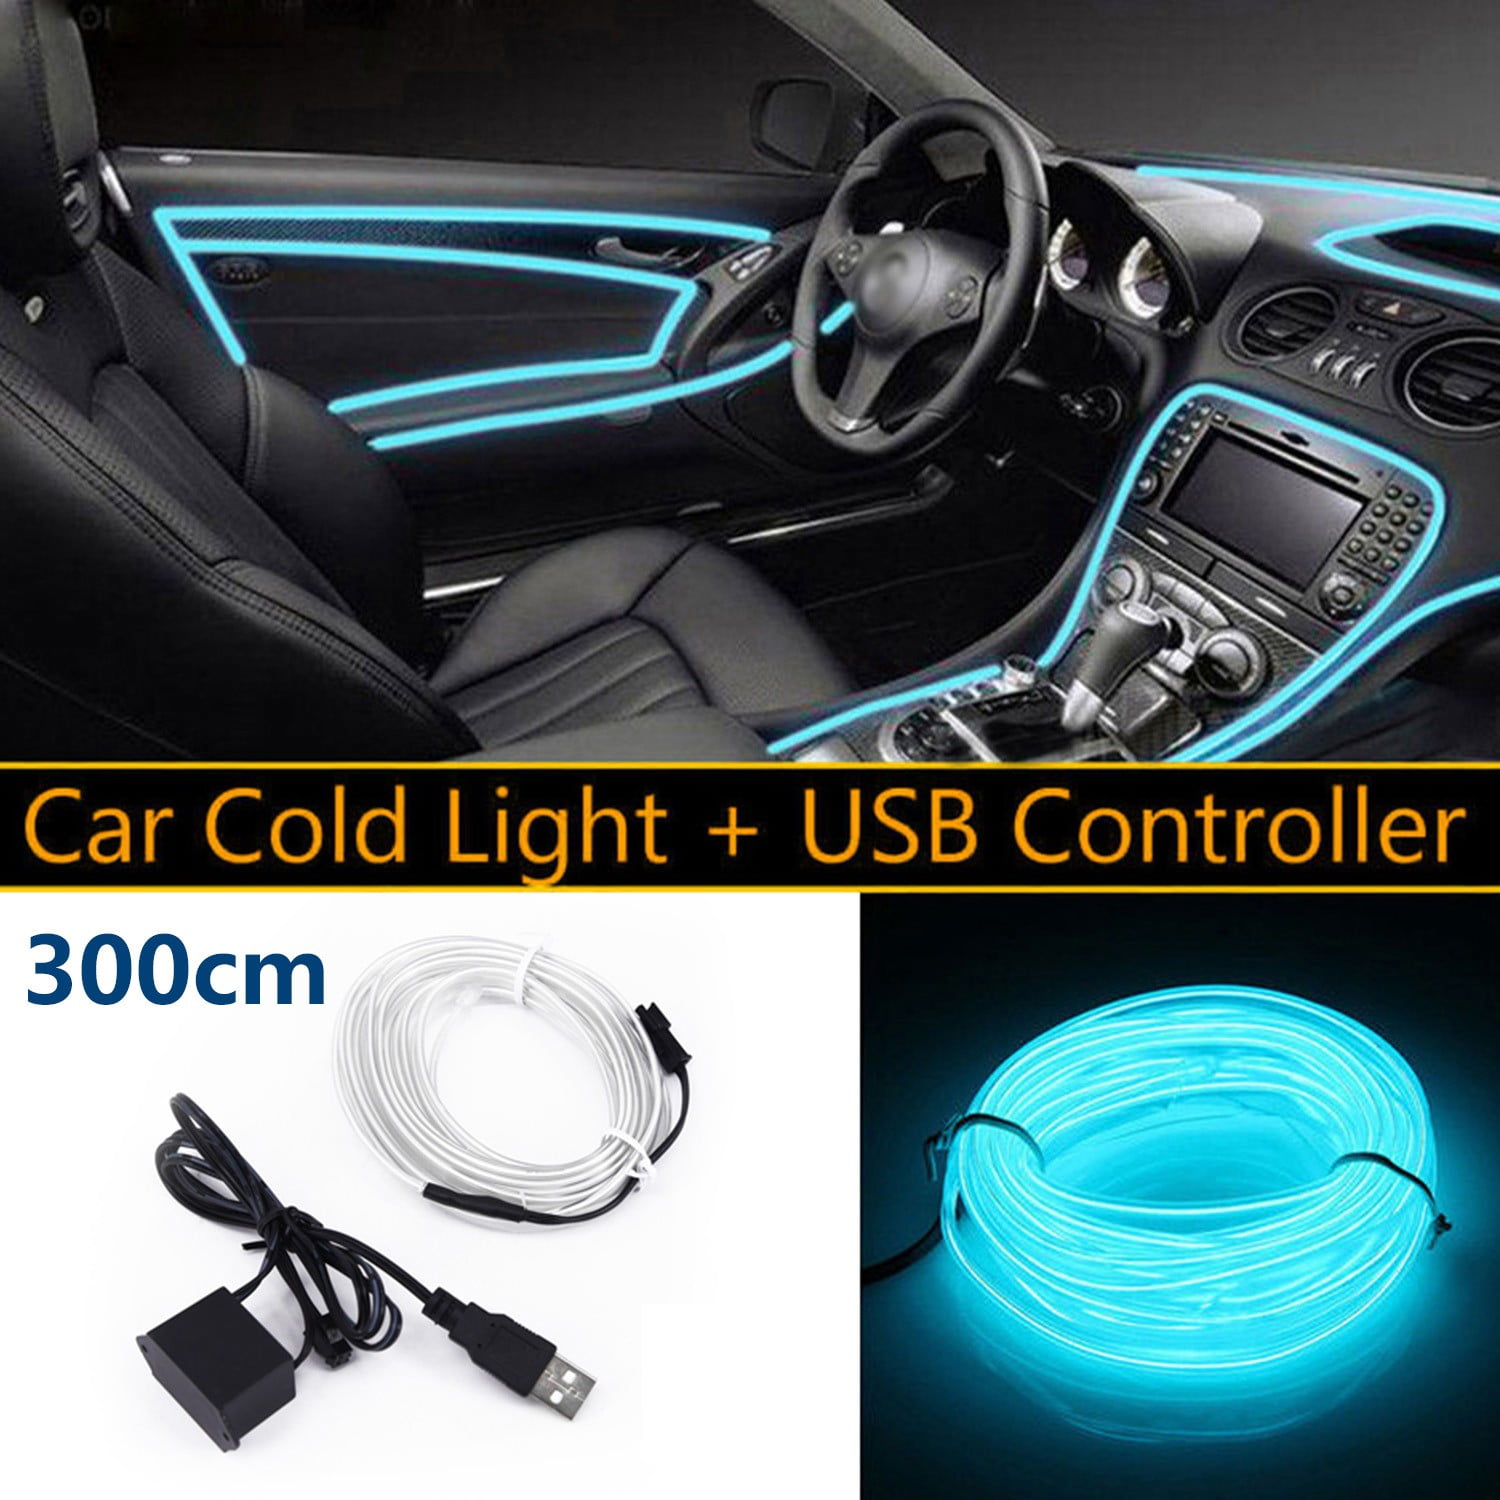 EL Wire Interior Car Strip Lights, USB Auto Neon Light Strip with Sewing Edge, 16FT Electroluminescent Car Ambient Lighting Kits with Fuse Protection, Car Interior Decoration Accessories Walmart.com